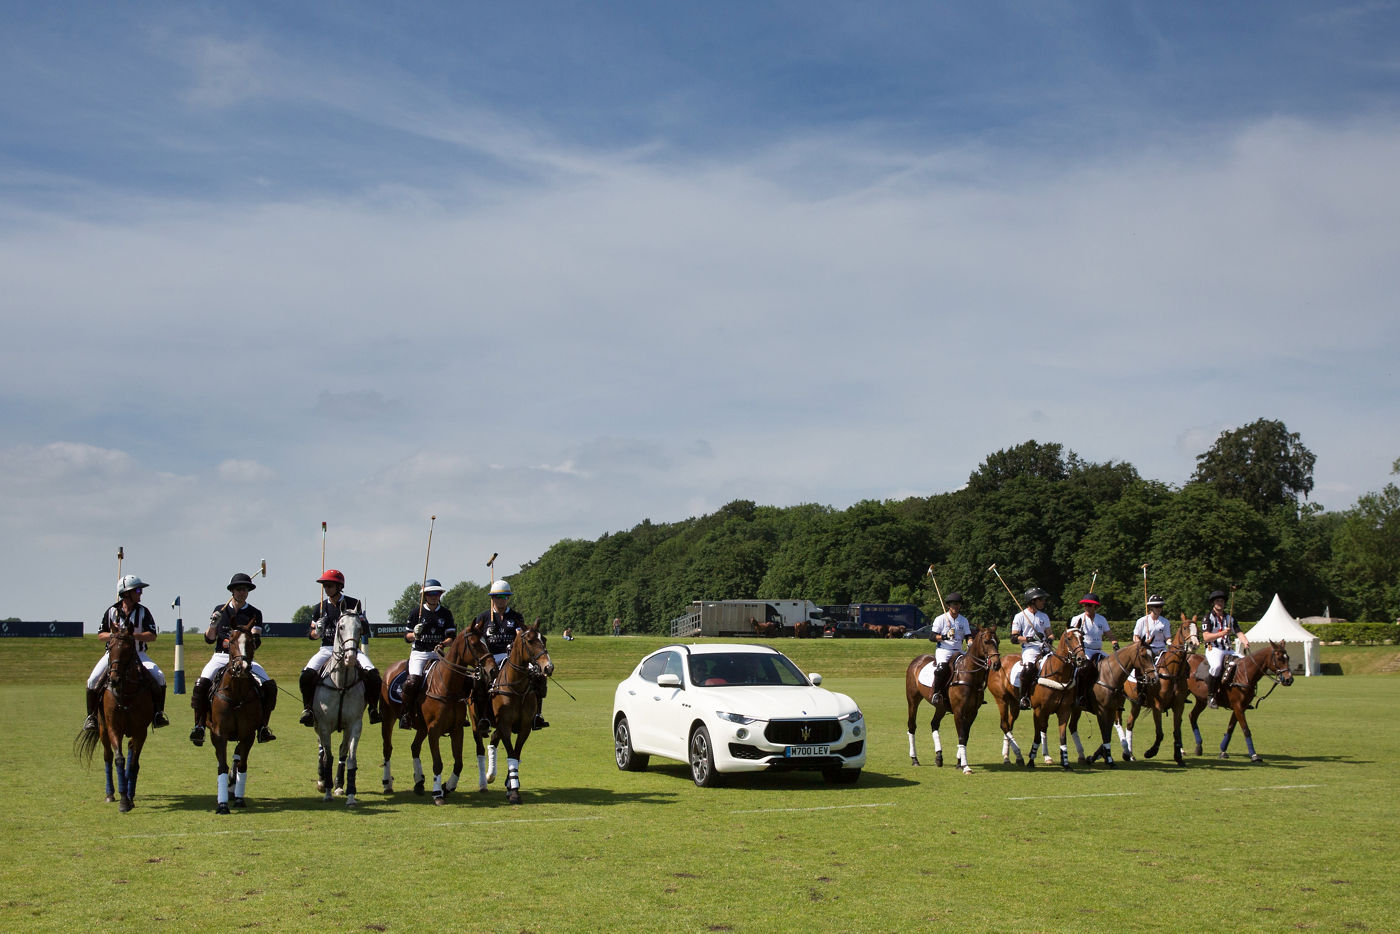 Maserati Polo Tour 2018 - UK - Levante SUV leads the players on to the field